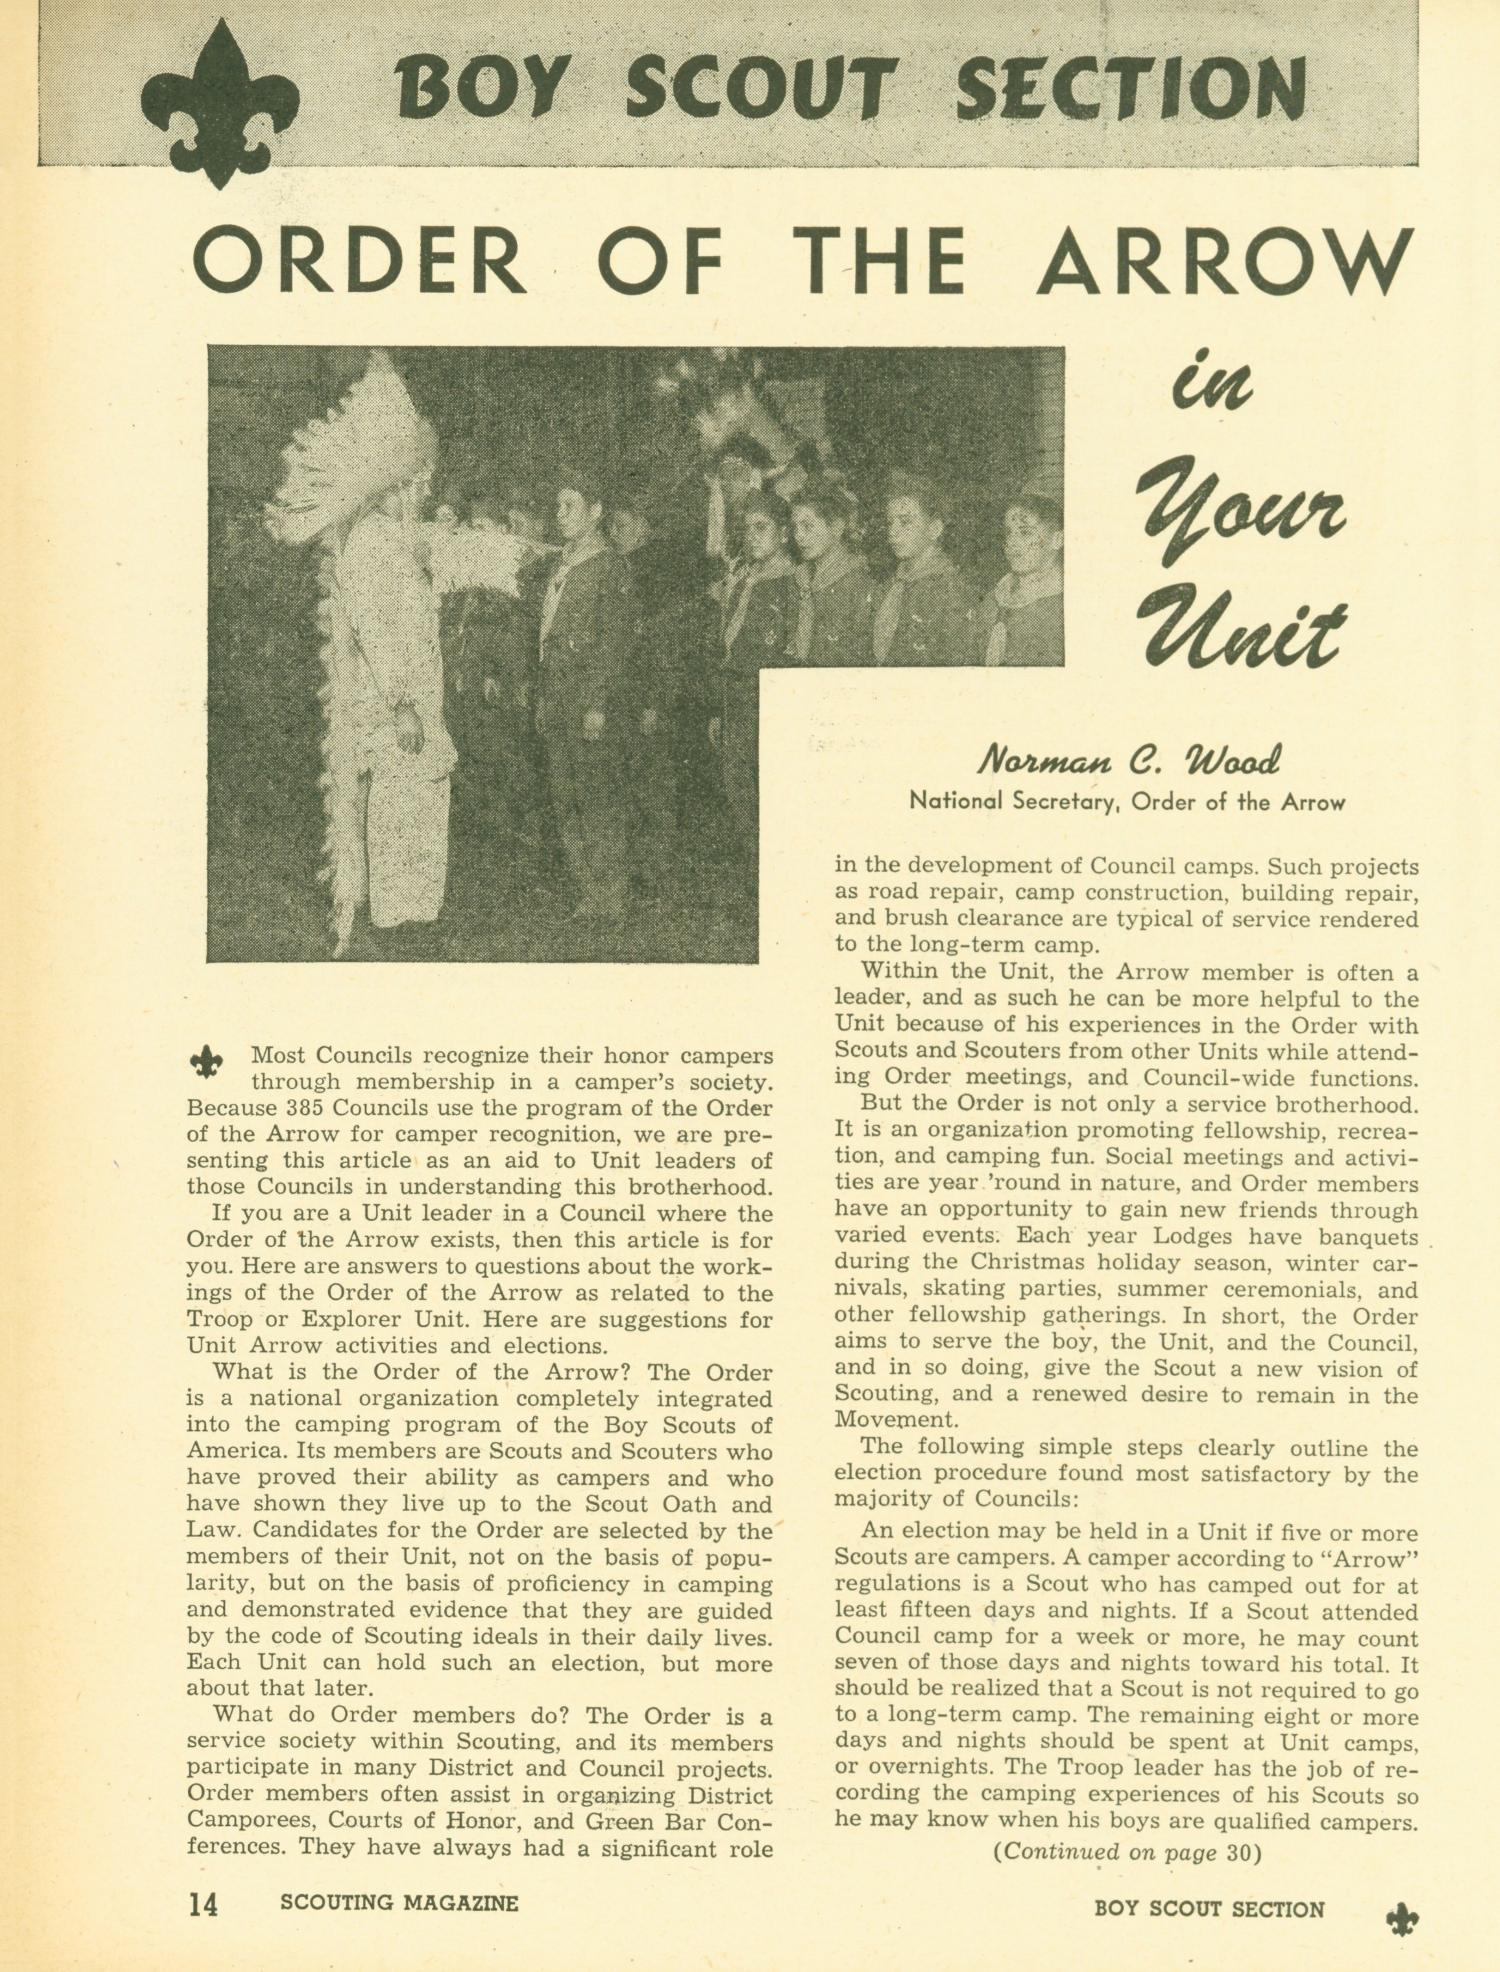 Scouting, Volume 38, Number 3, March 1950
                                                
                                                    14
                                                